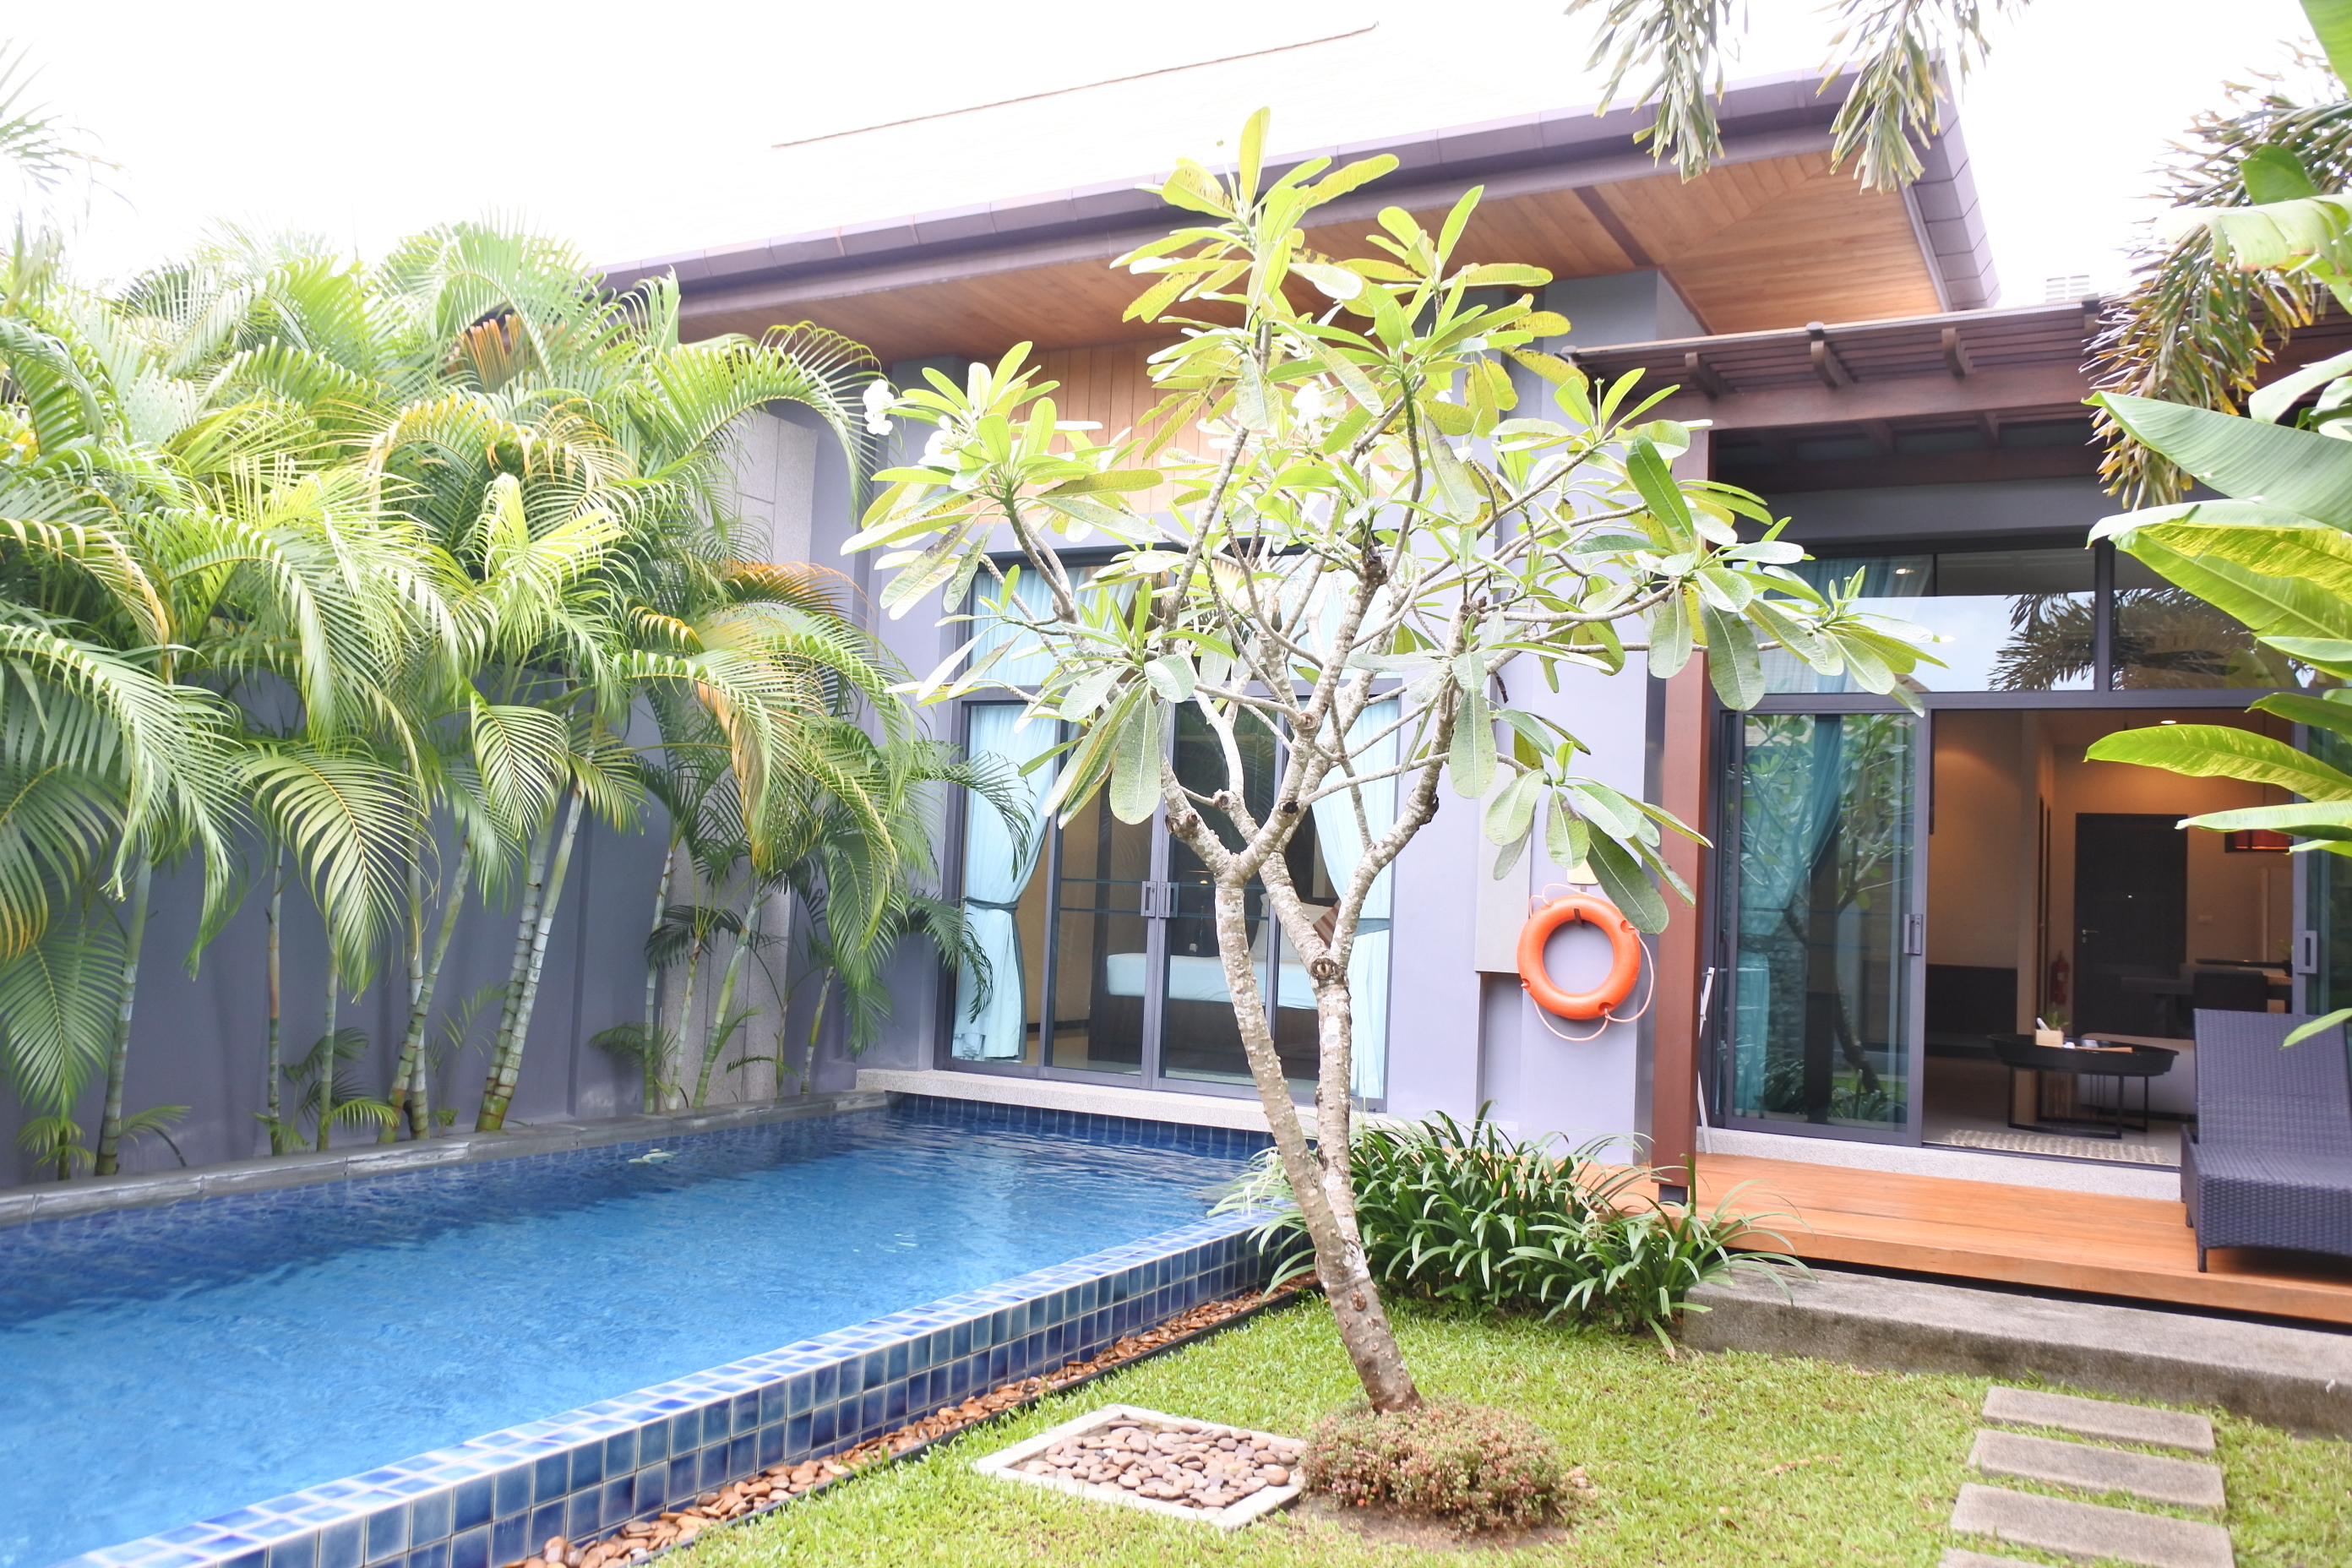 2 bath and Two Bedrooms in Bang Tao Thailand